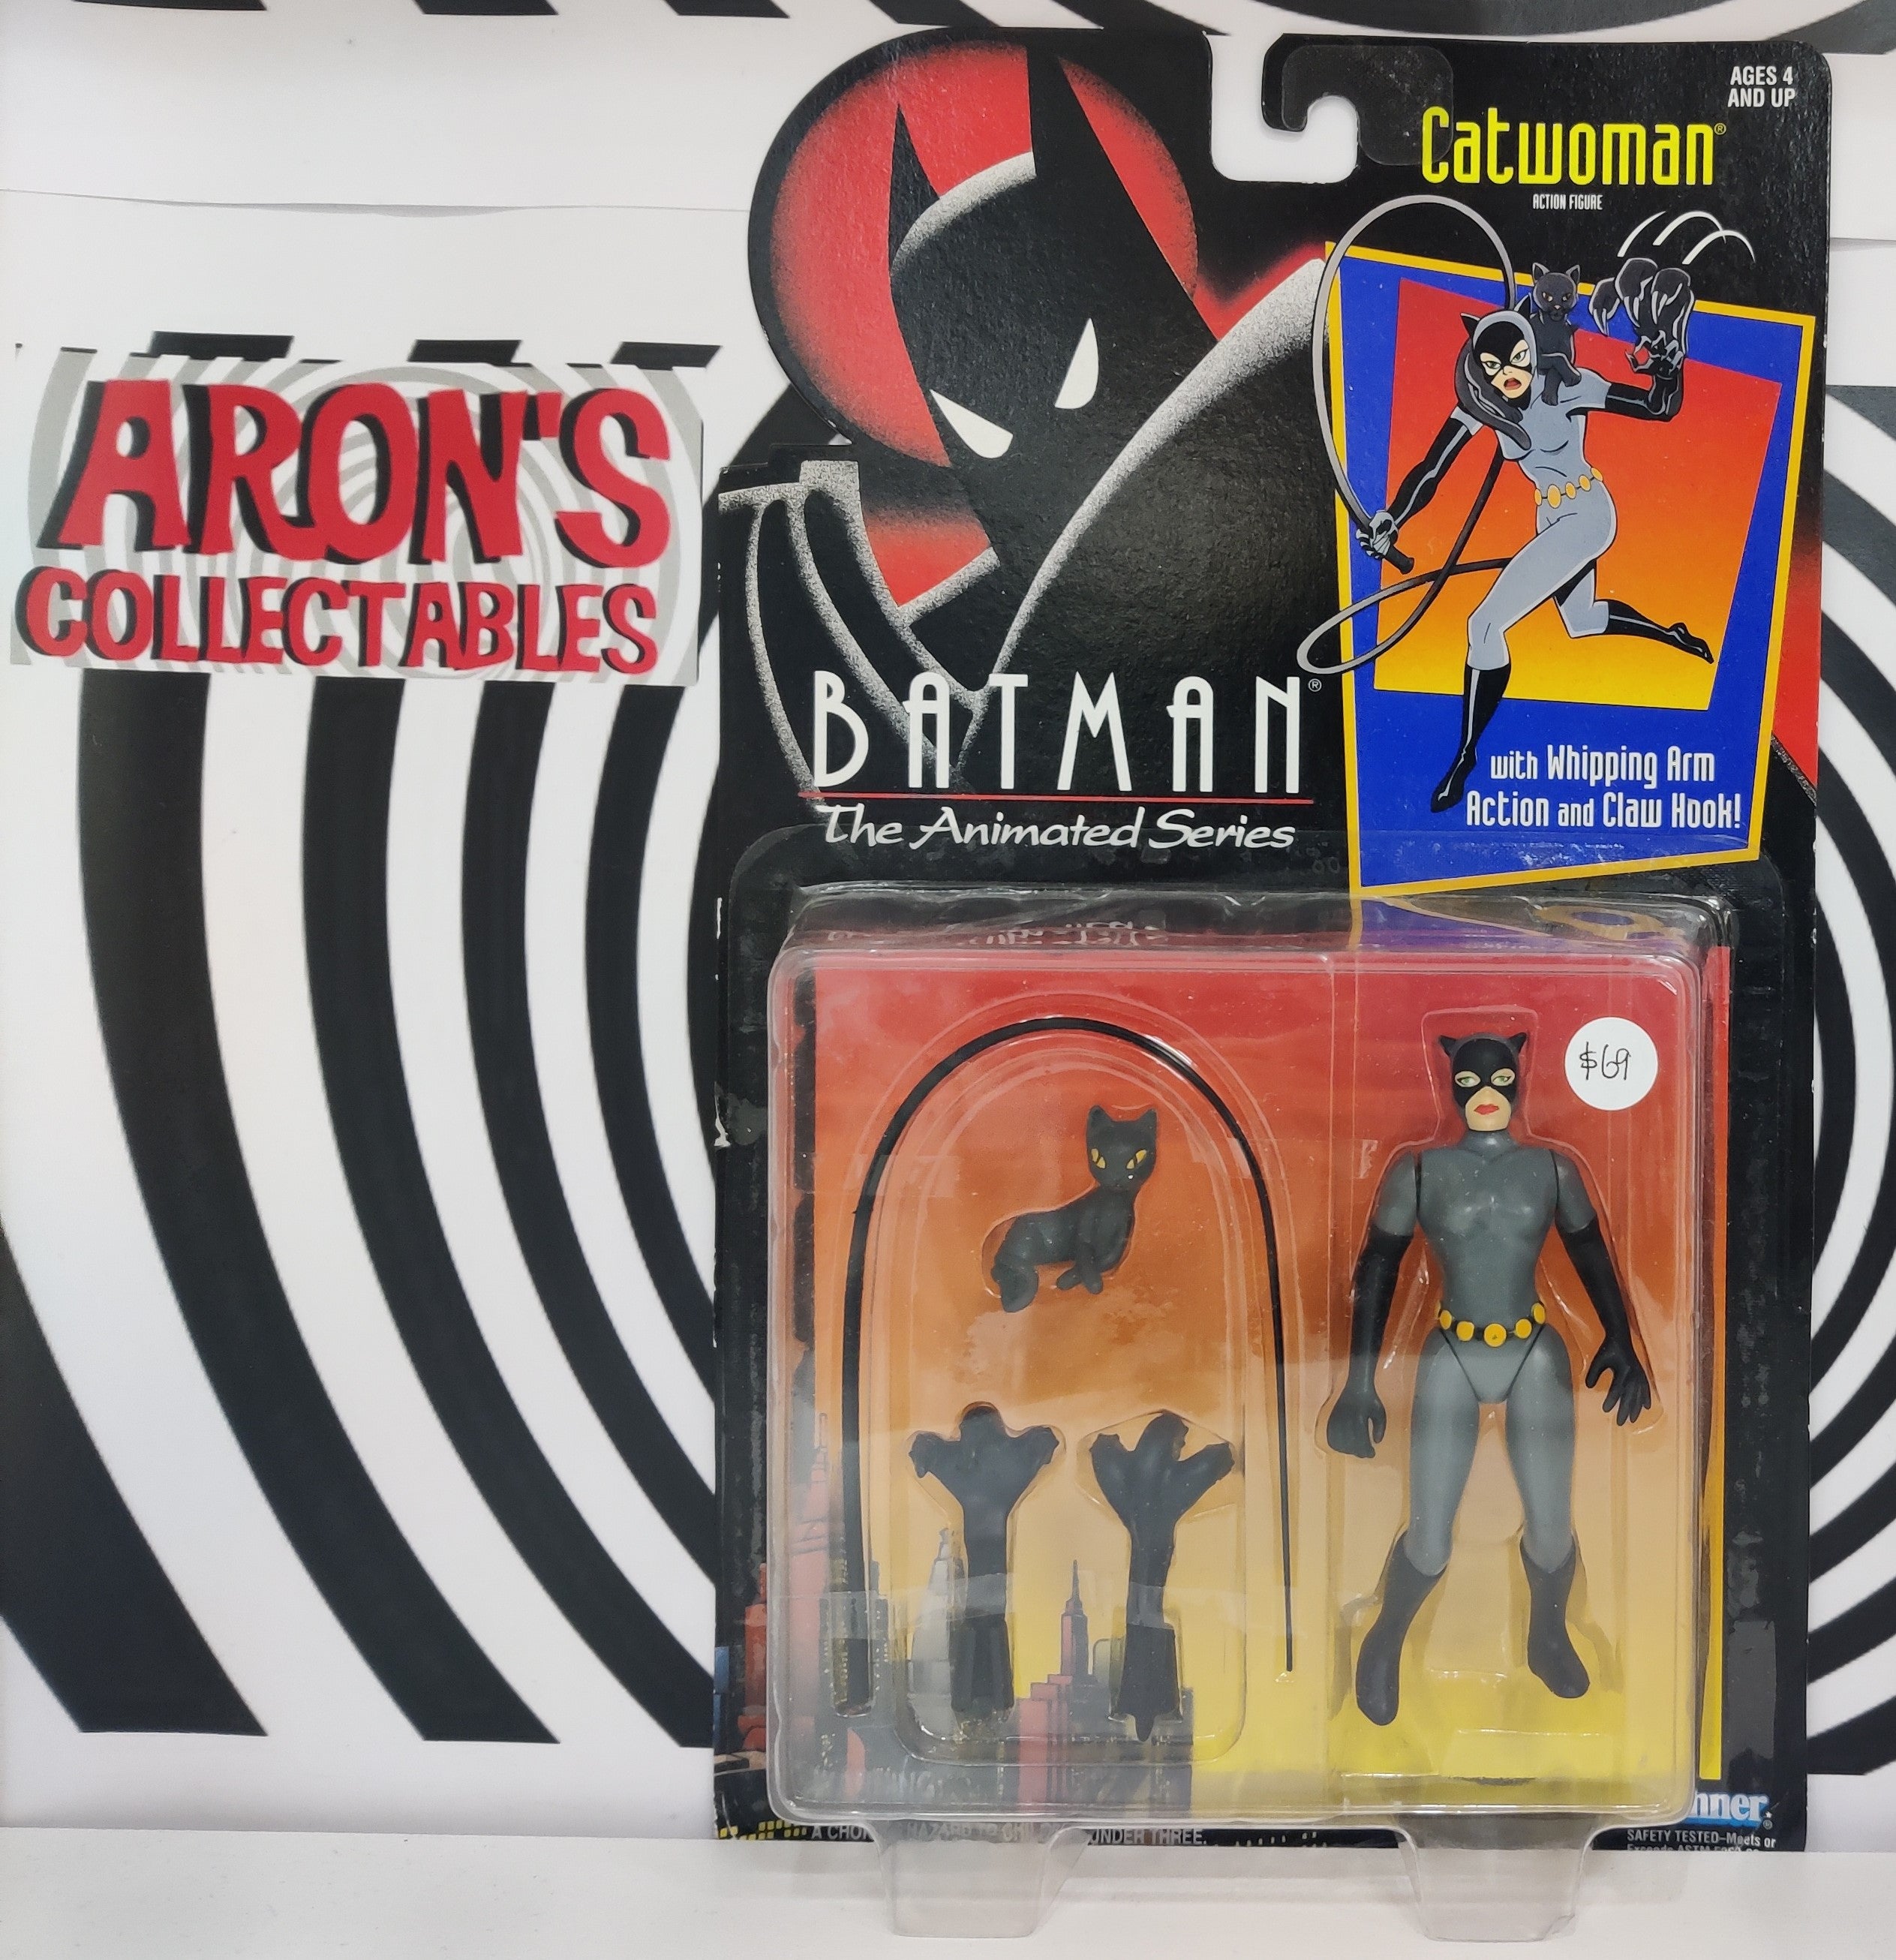 Batman The Animated Series Catwoman Action Figure – Arons Collectables